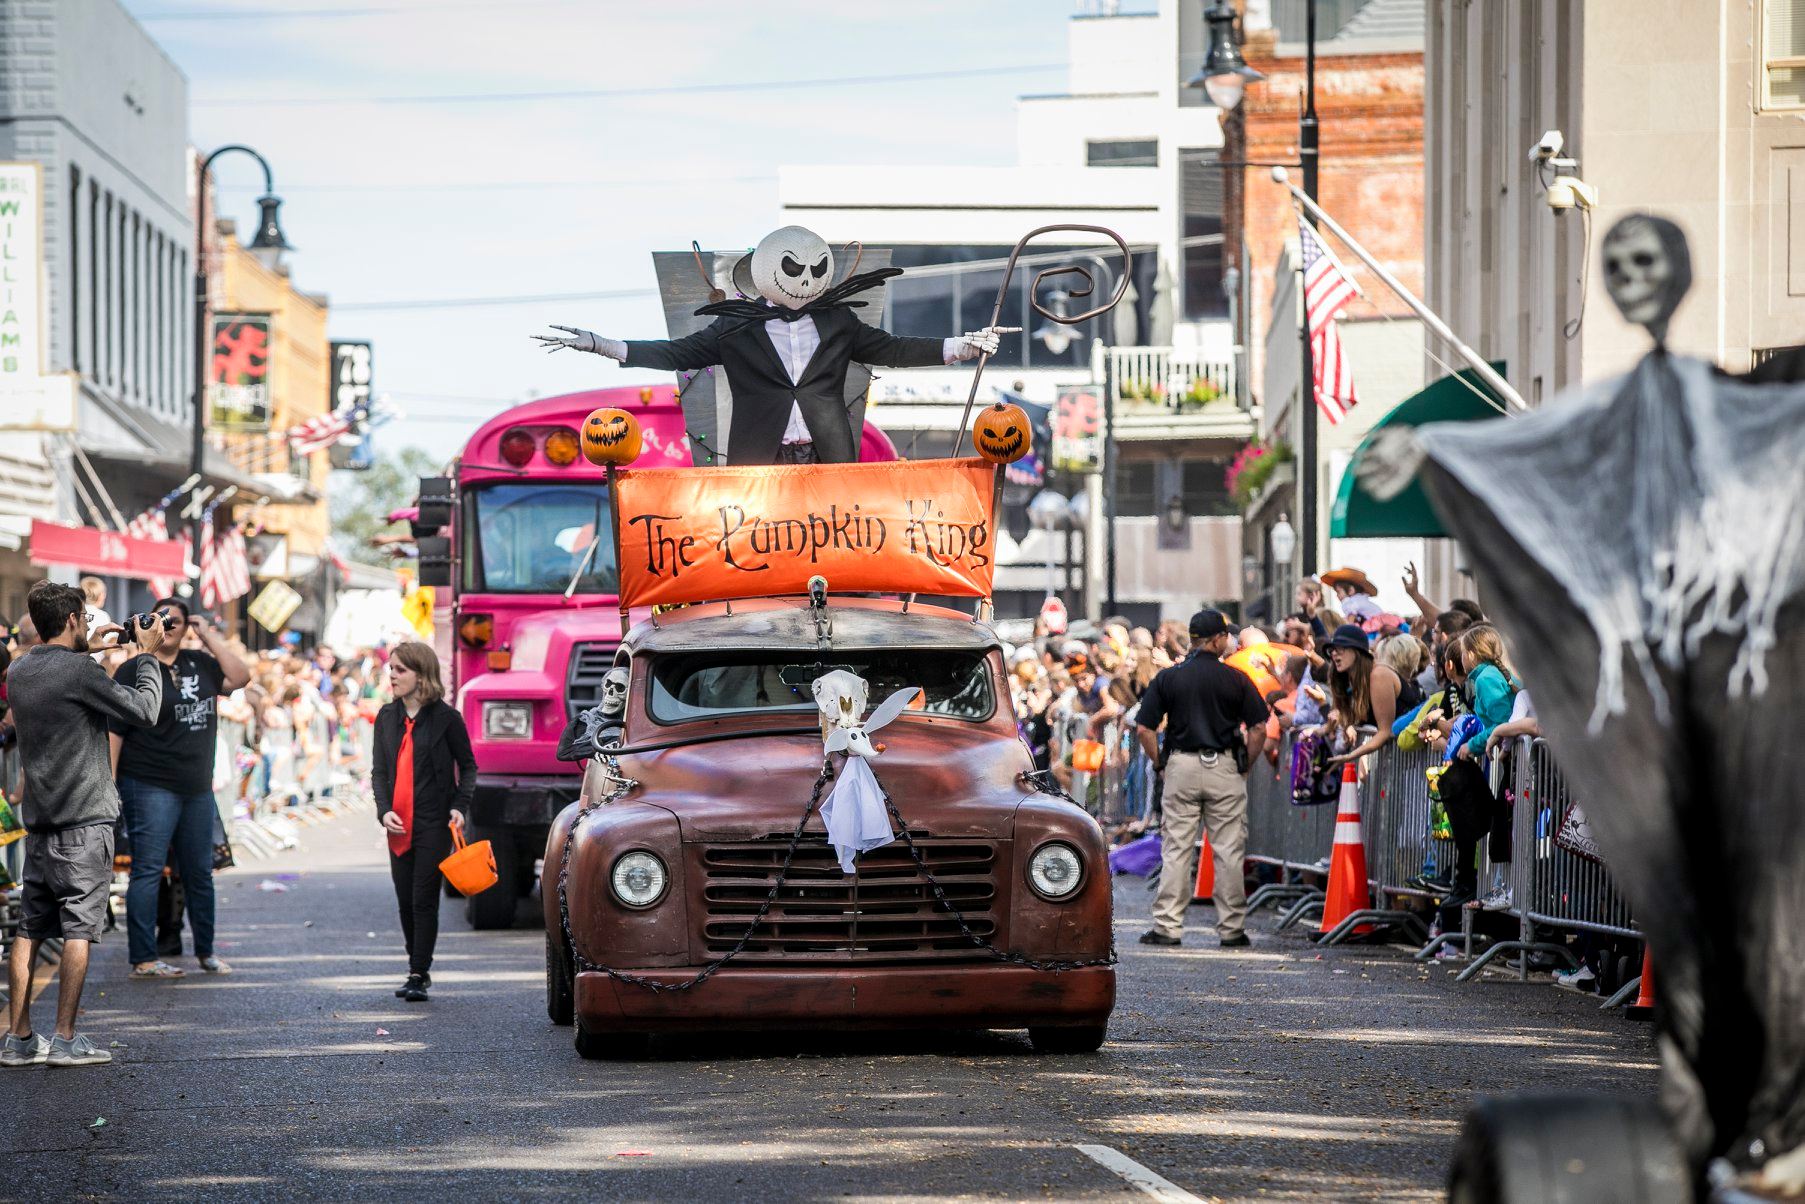 The award-winning annual Rougarou Fest features the Krewe Ga Rou parade. Photo credit: Misty Leigh McElroy